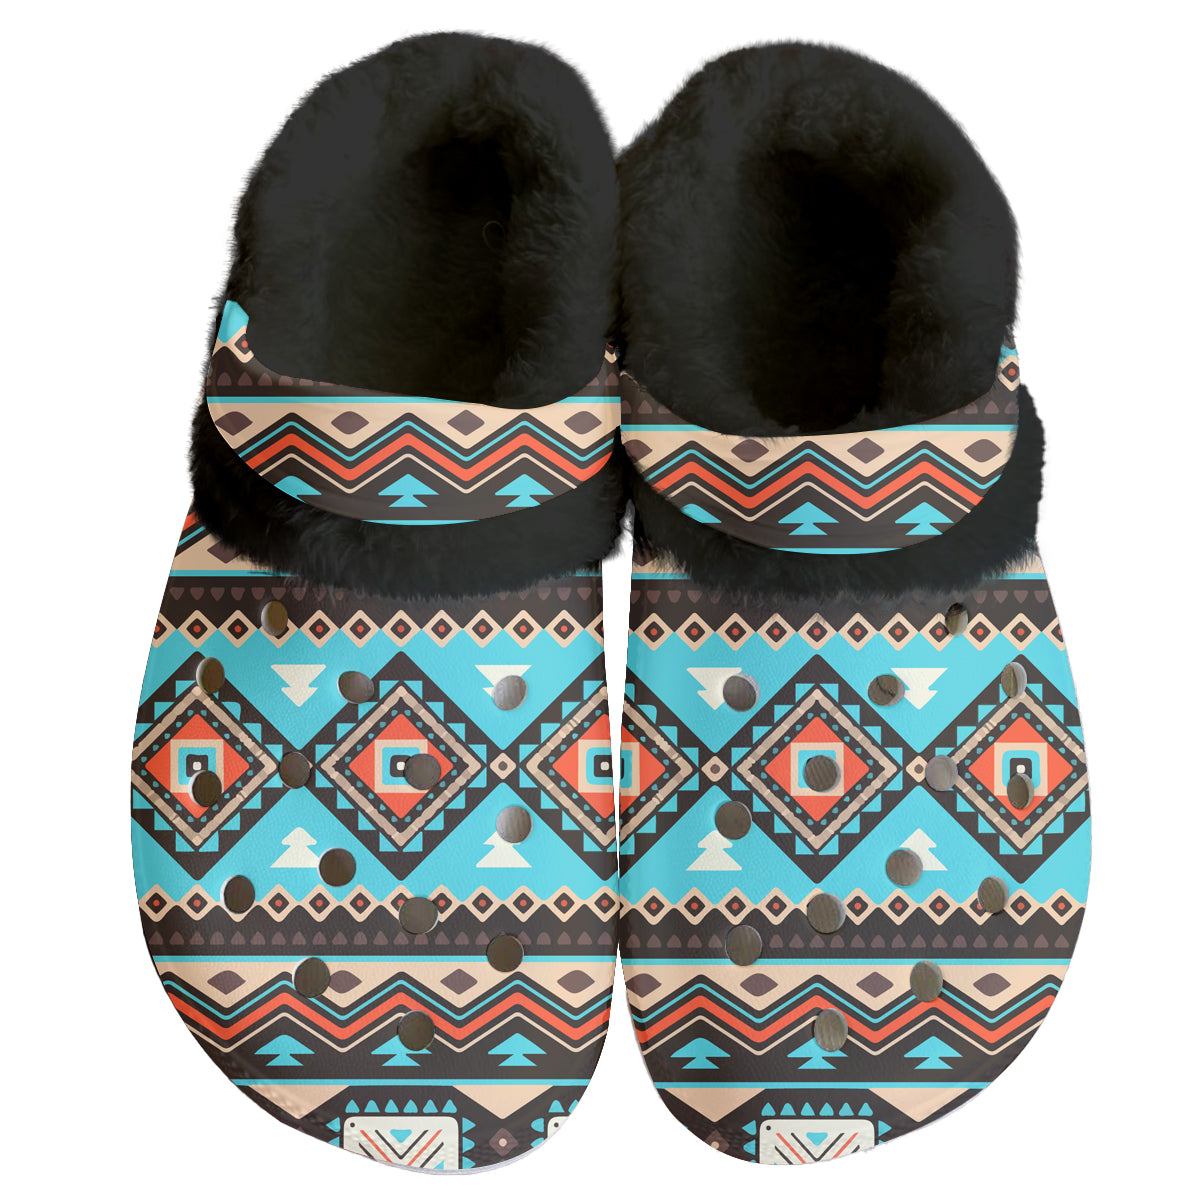 Powwow Storegb nat00319 pattern native american classic clogs with fleece shoes